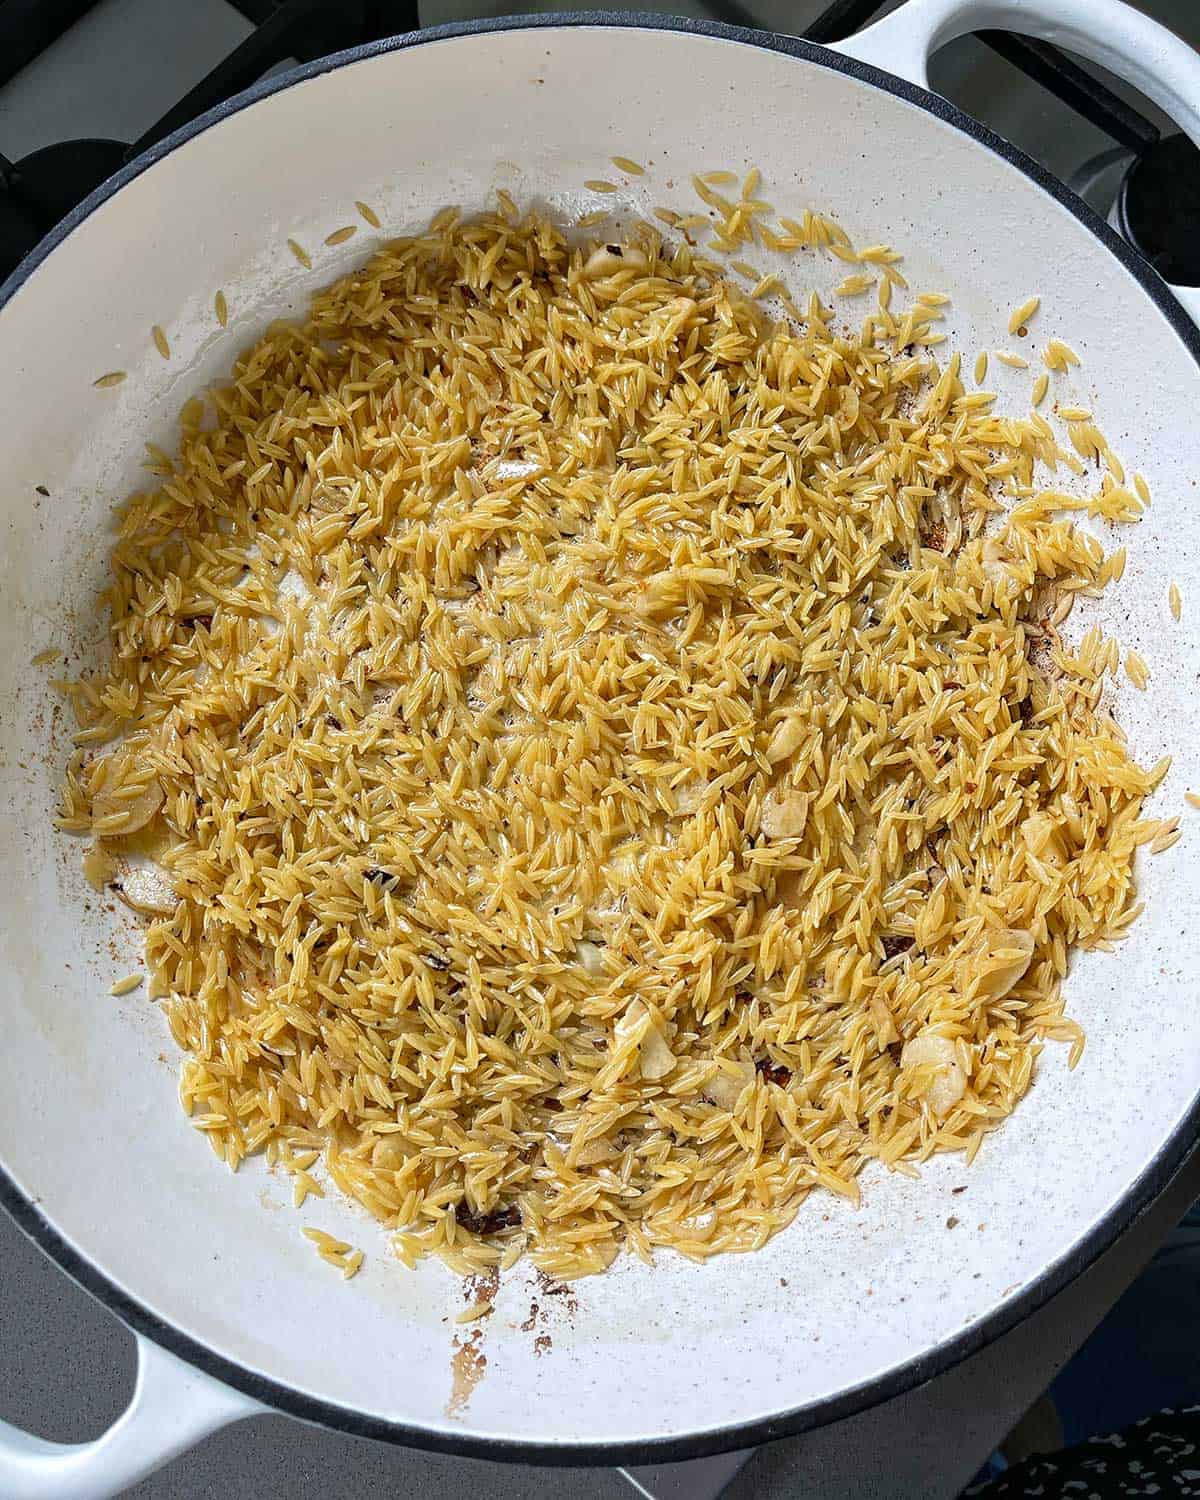 Orzo cooking in a large white frying pan.